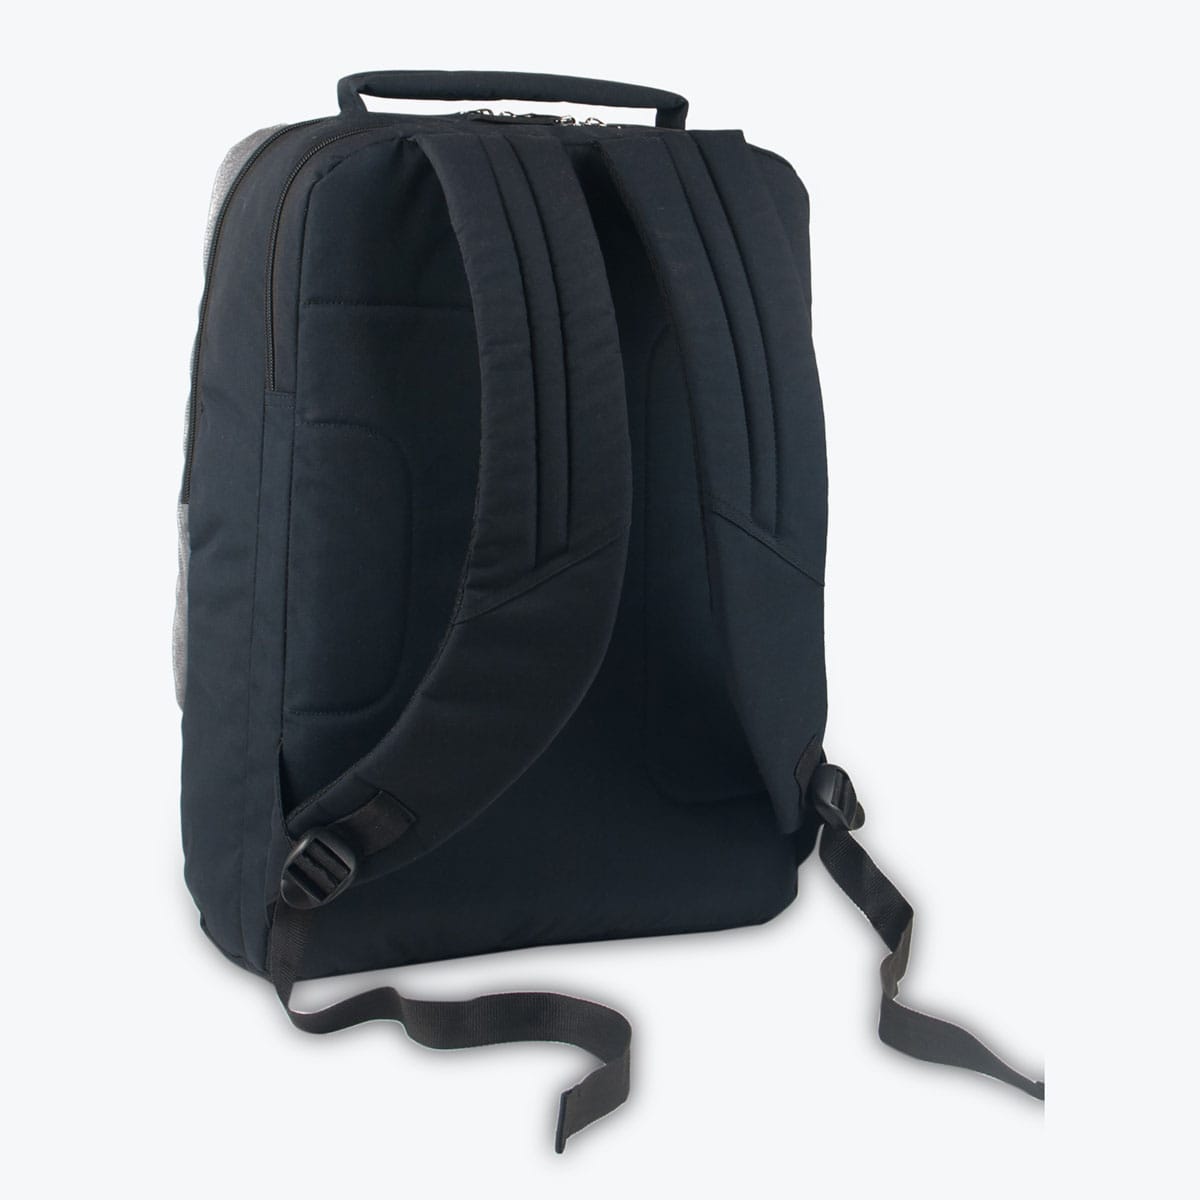 Black-Grey | Protecta Type A Travel Laptop Backpack-4